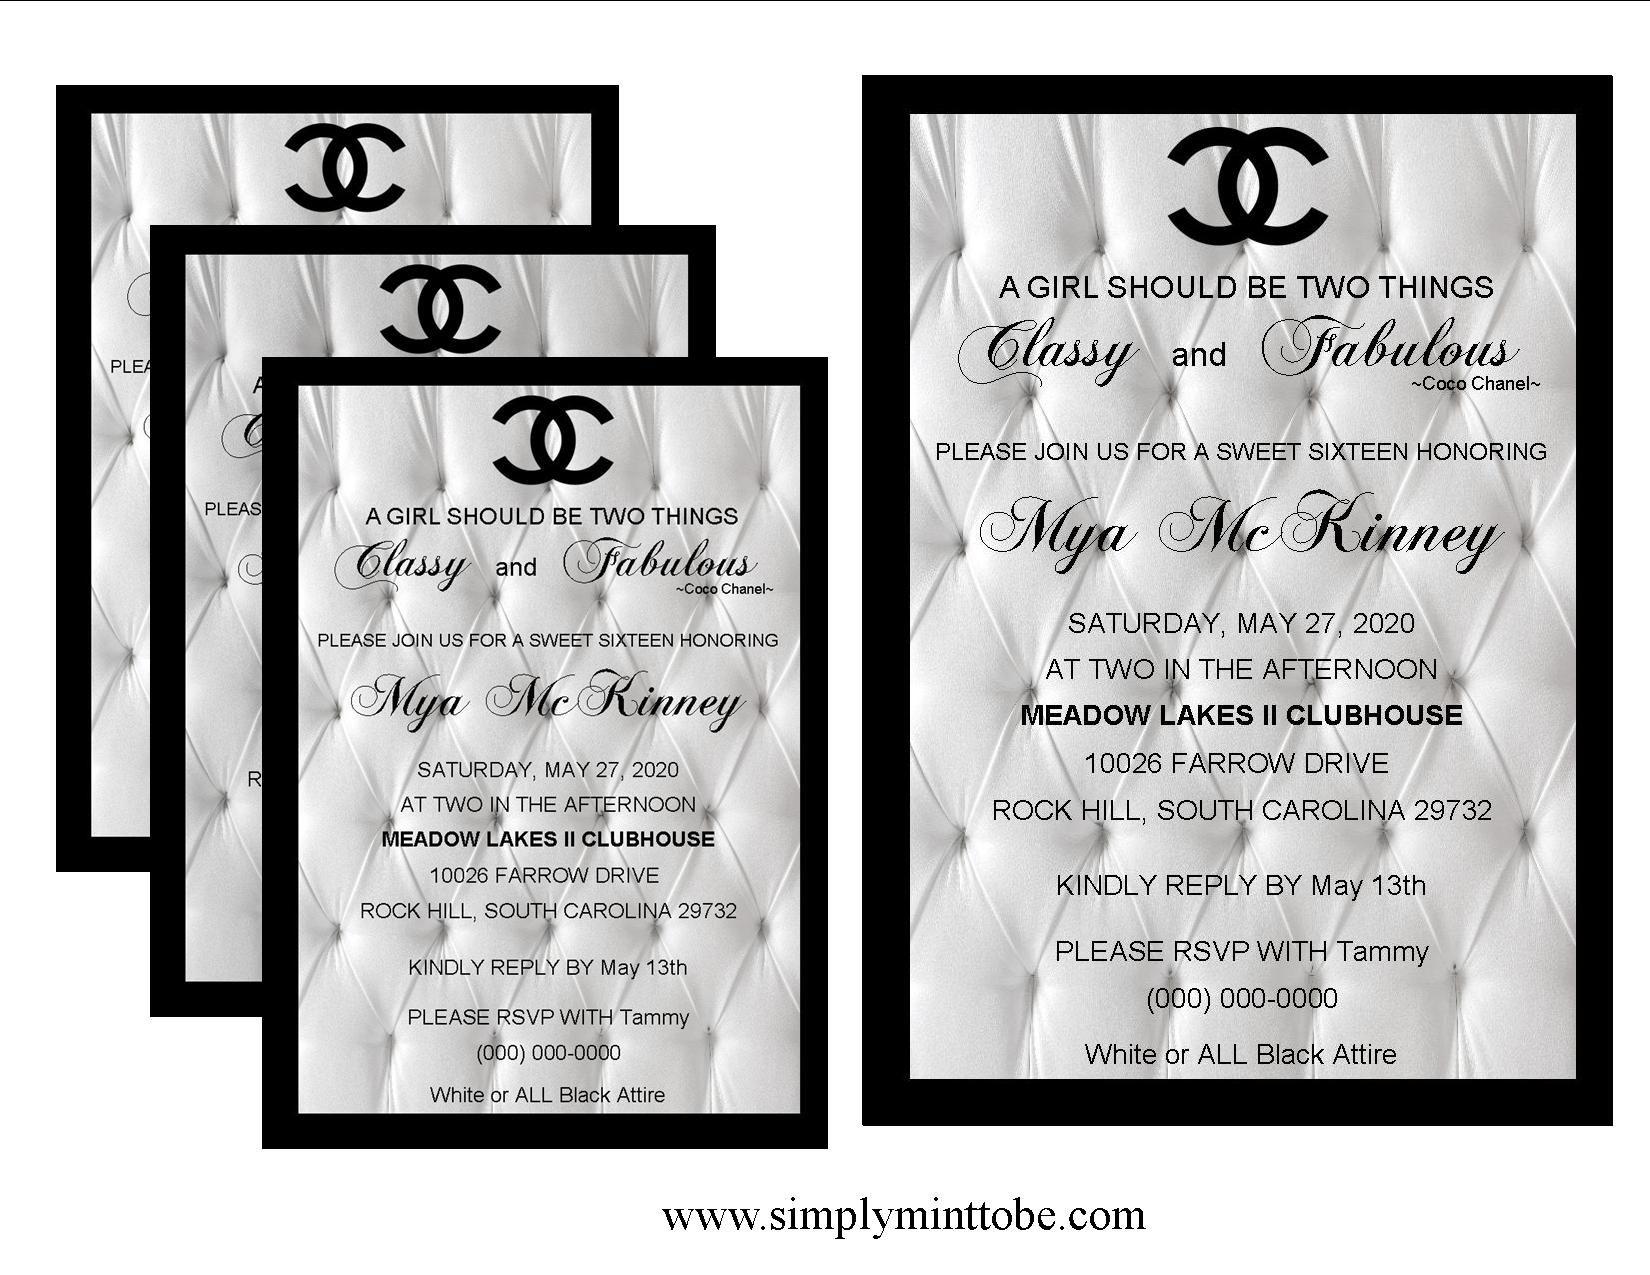 Large Chanel Logo - Coco Chanel Classy and Fabulous Inspired Large White Sweet 16